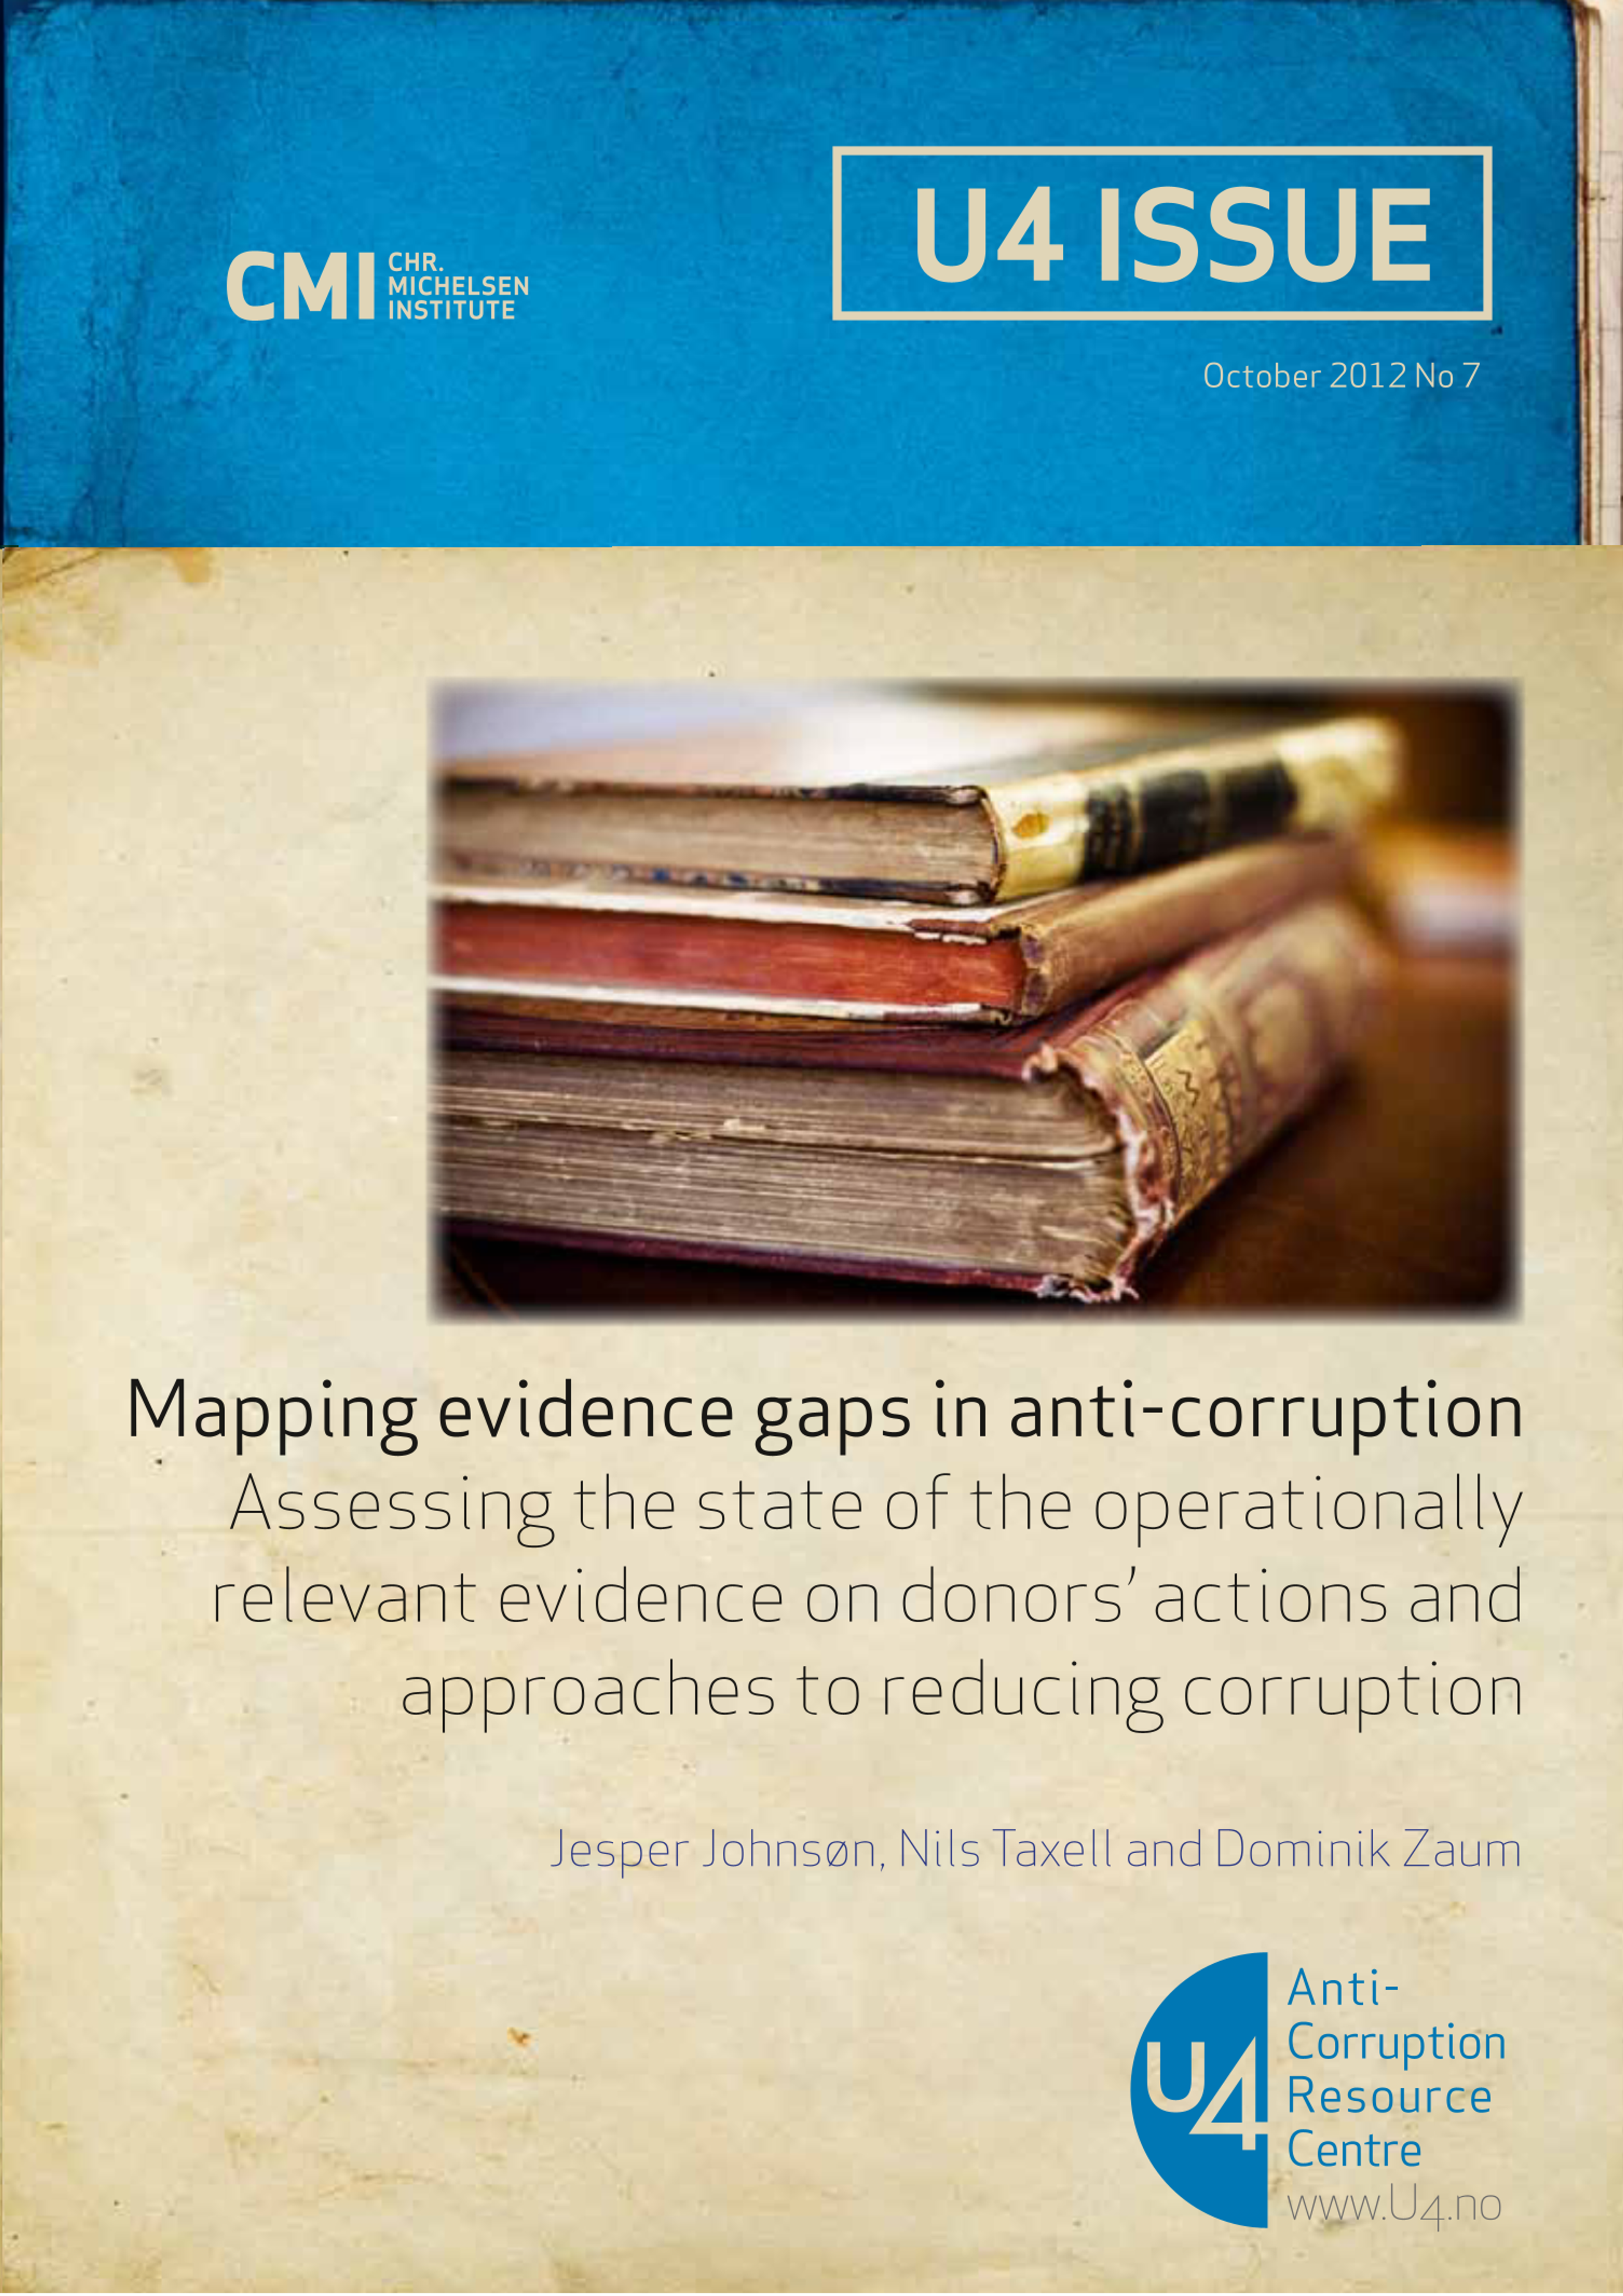 Mapping evidence gaps in anti-corruption: Assessing the state of the operationally relevant evidence on donors' actions and approaches to reducing corruption